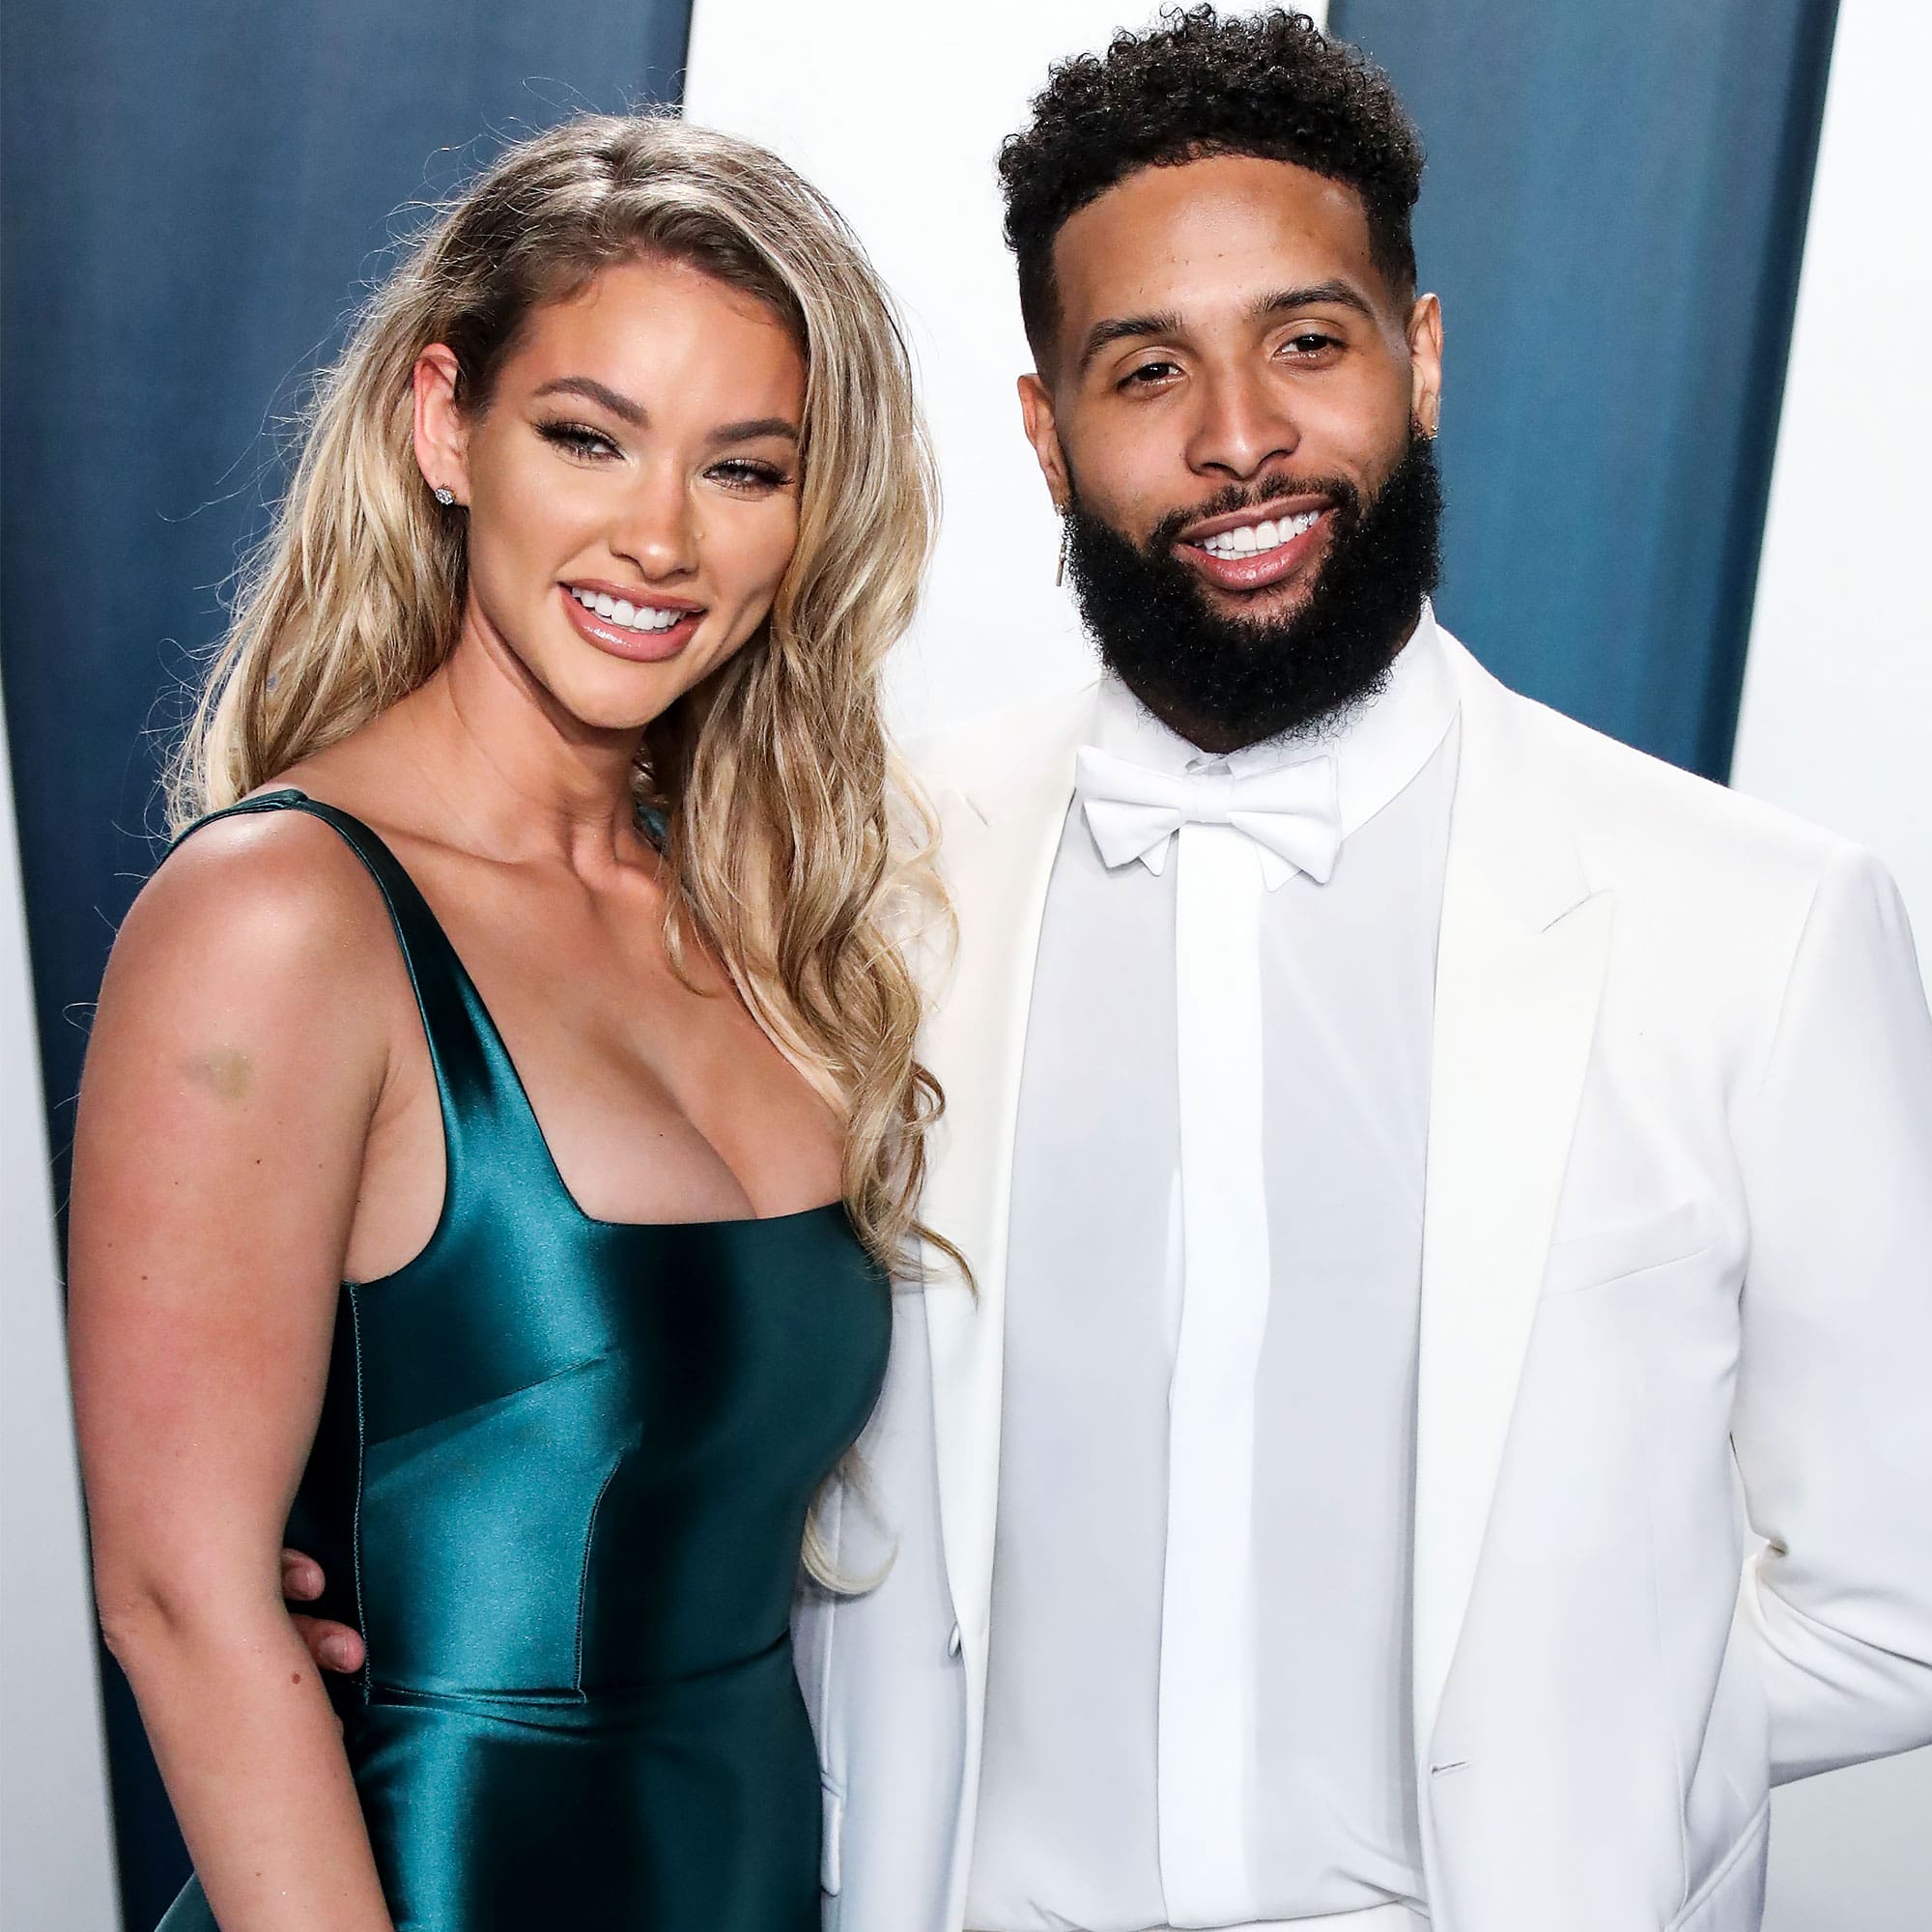 odell-beckham-jr-and-lauren-wood-celebrate-the-birth-of-their-child